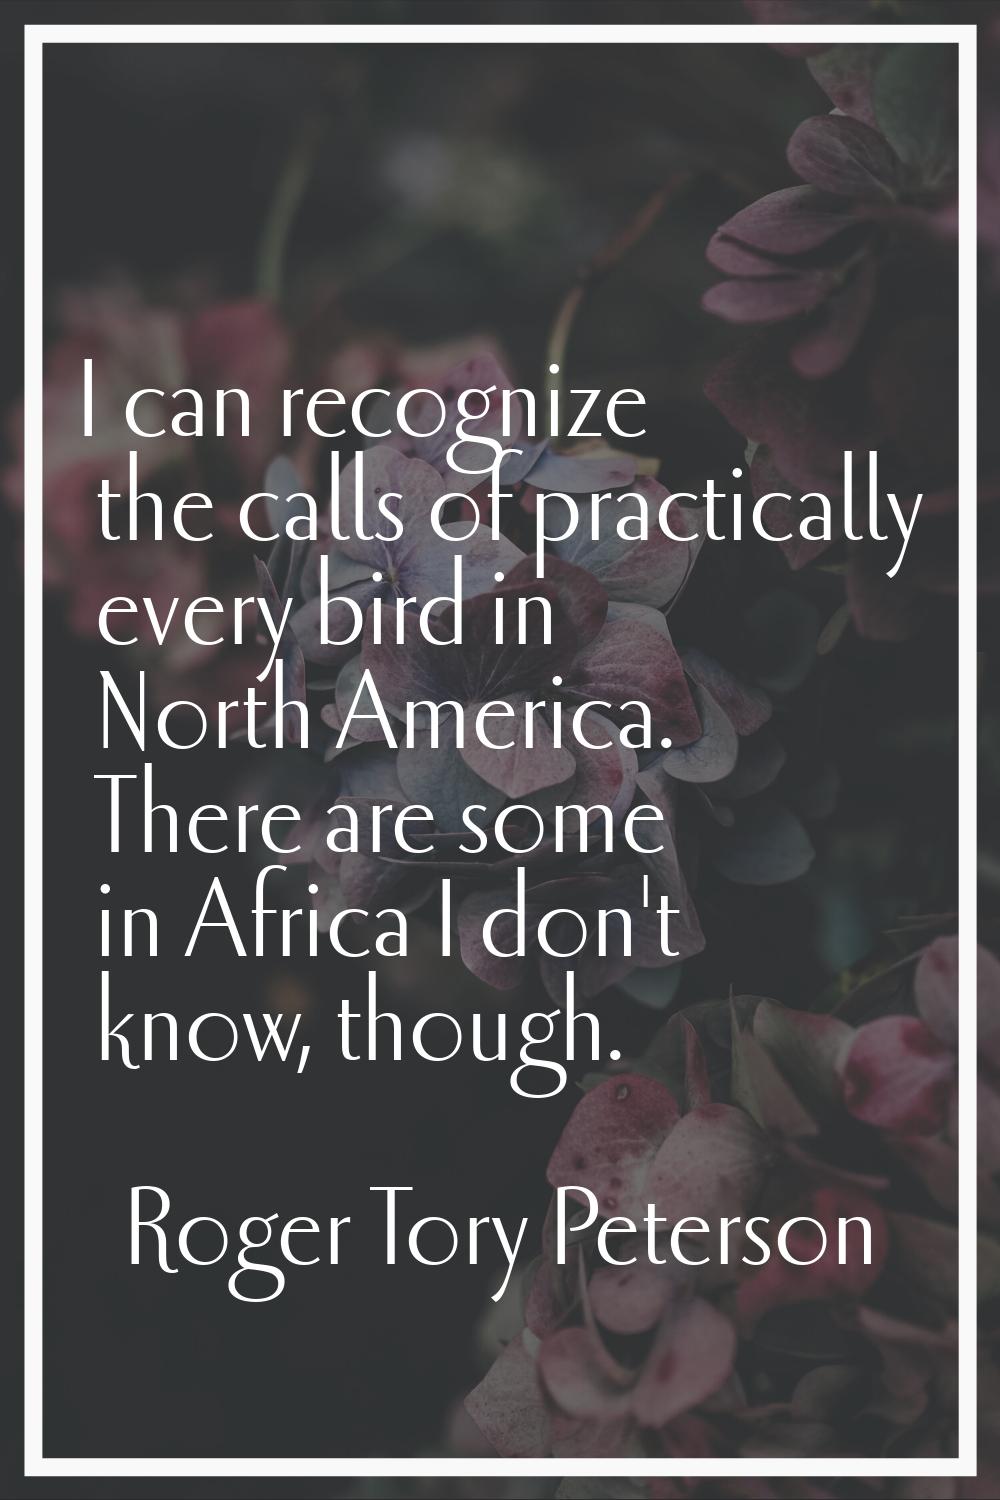 I can recognize the calls of practically every bird in North America. There are some in Africa I do